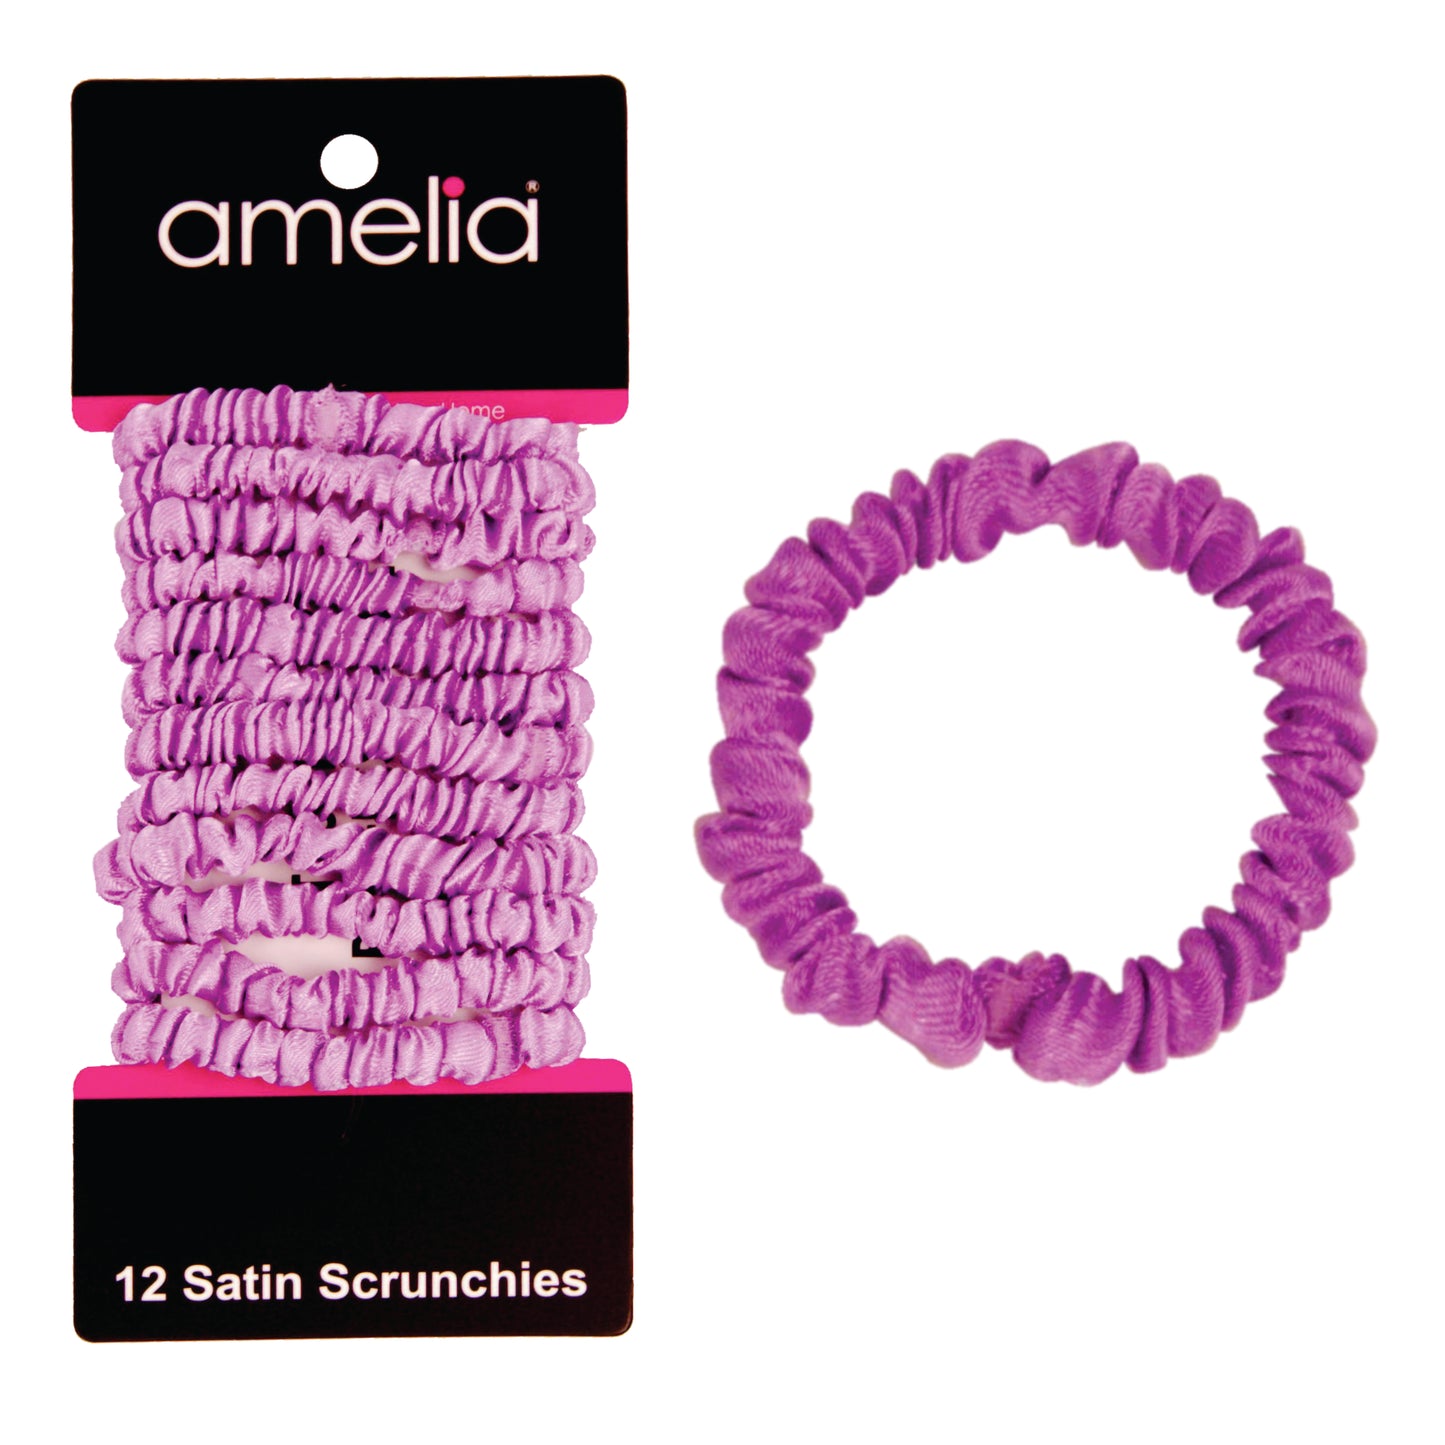 Amelia Beauty, Lavender Skinny Satin Scrunchies, 2in Diameter, Gentle and Strong Hold, No Snag, No Dents or Creases. 12 Pack